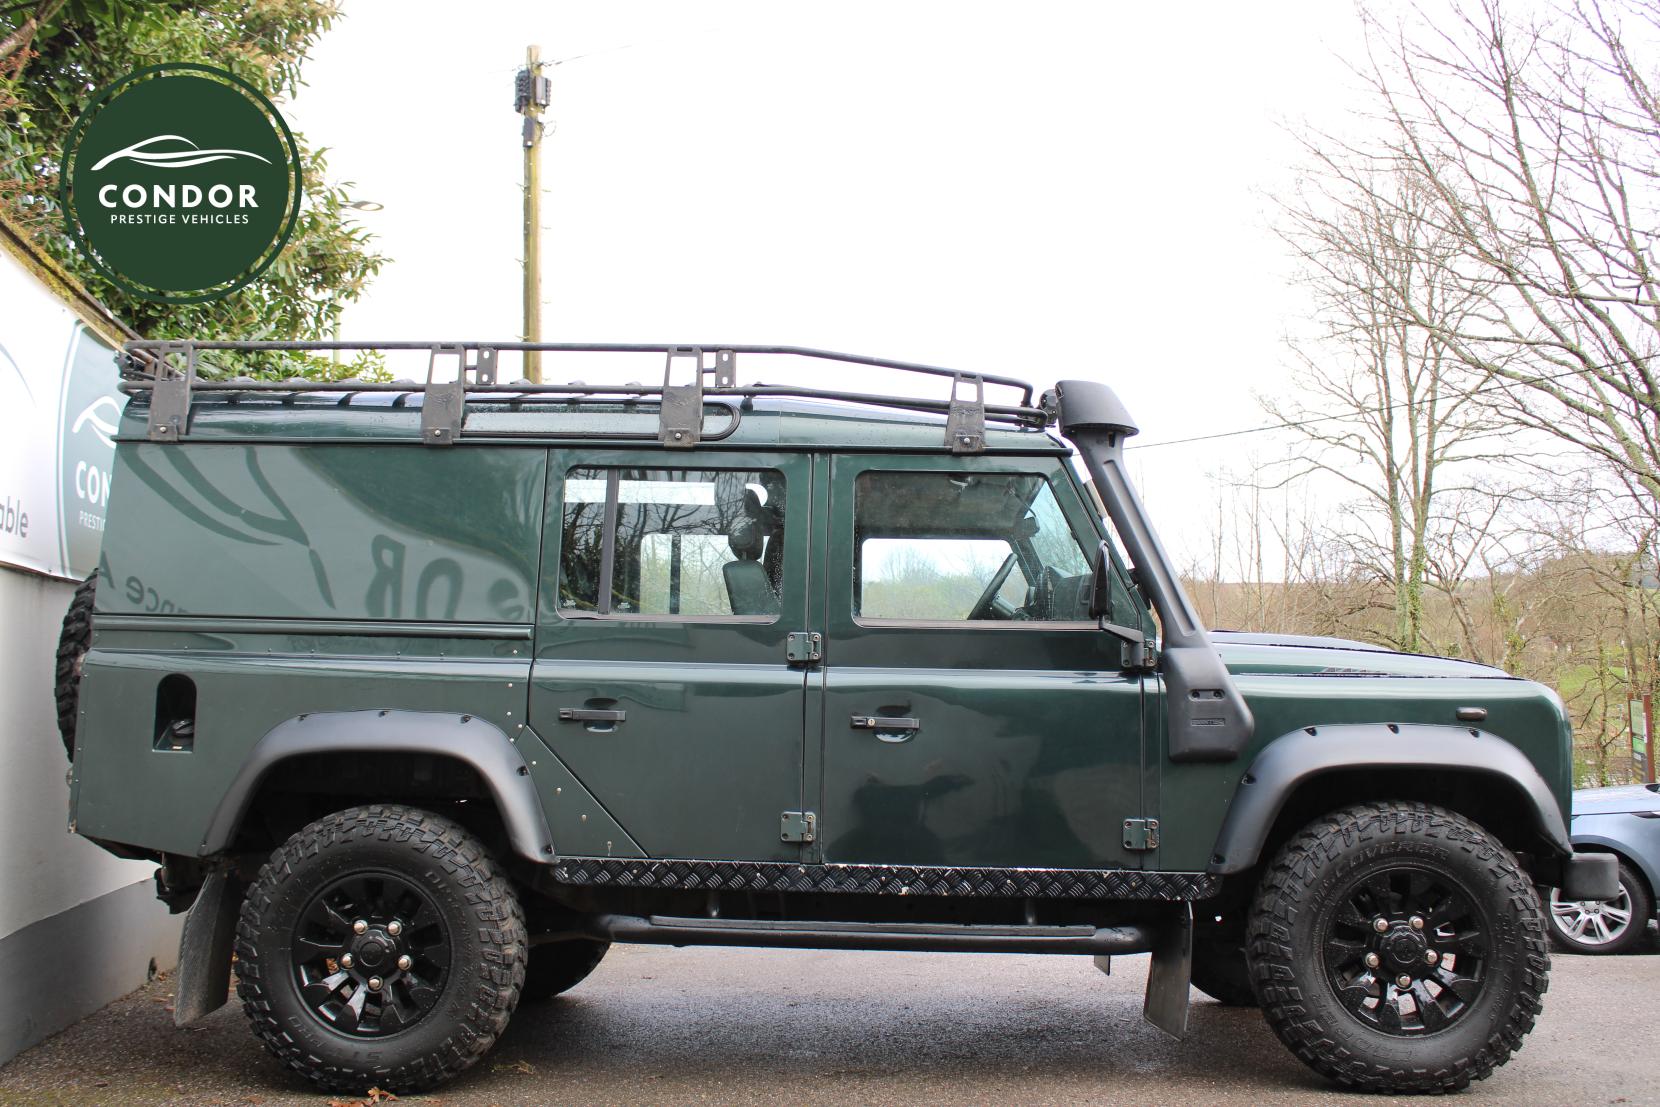 Land Rover Defender 110 2.4 TDCi XS Station Wagon 5dr Diesel Manual 4WD Euro 4 (122 bhp)